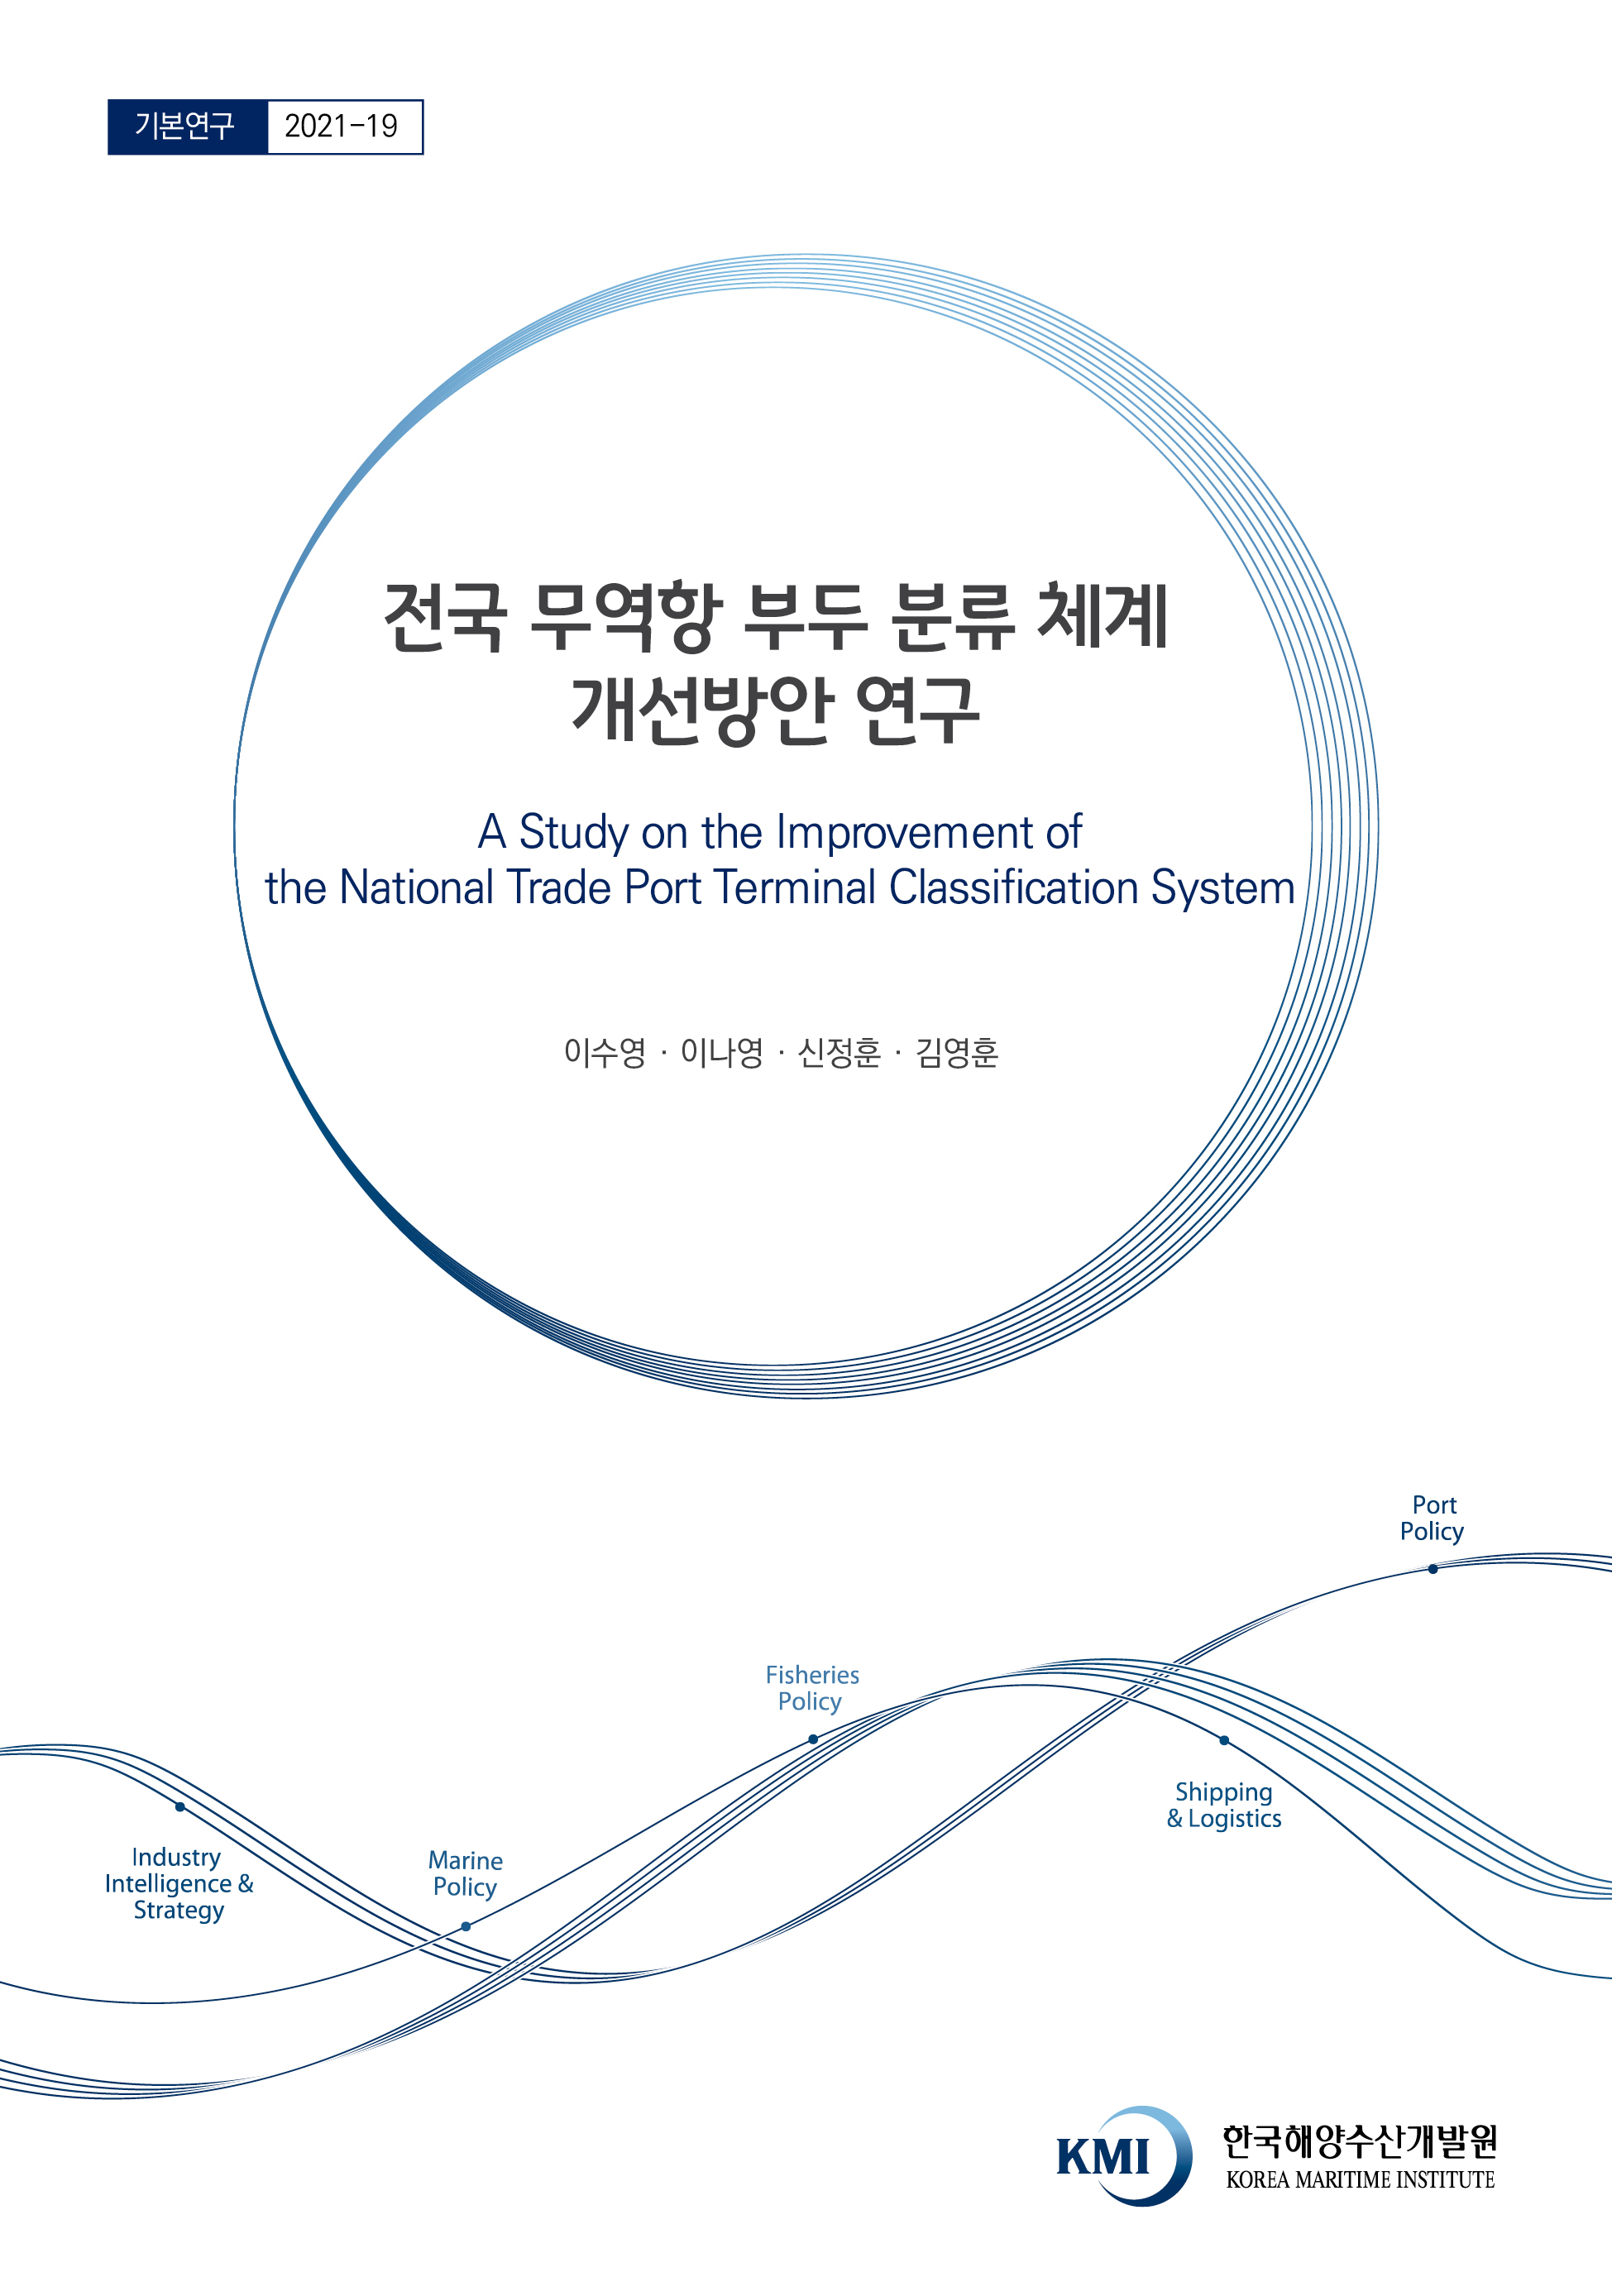 A Study on the Improvement of the National Trade Port Terminal Classification System